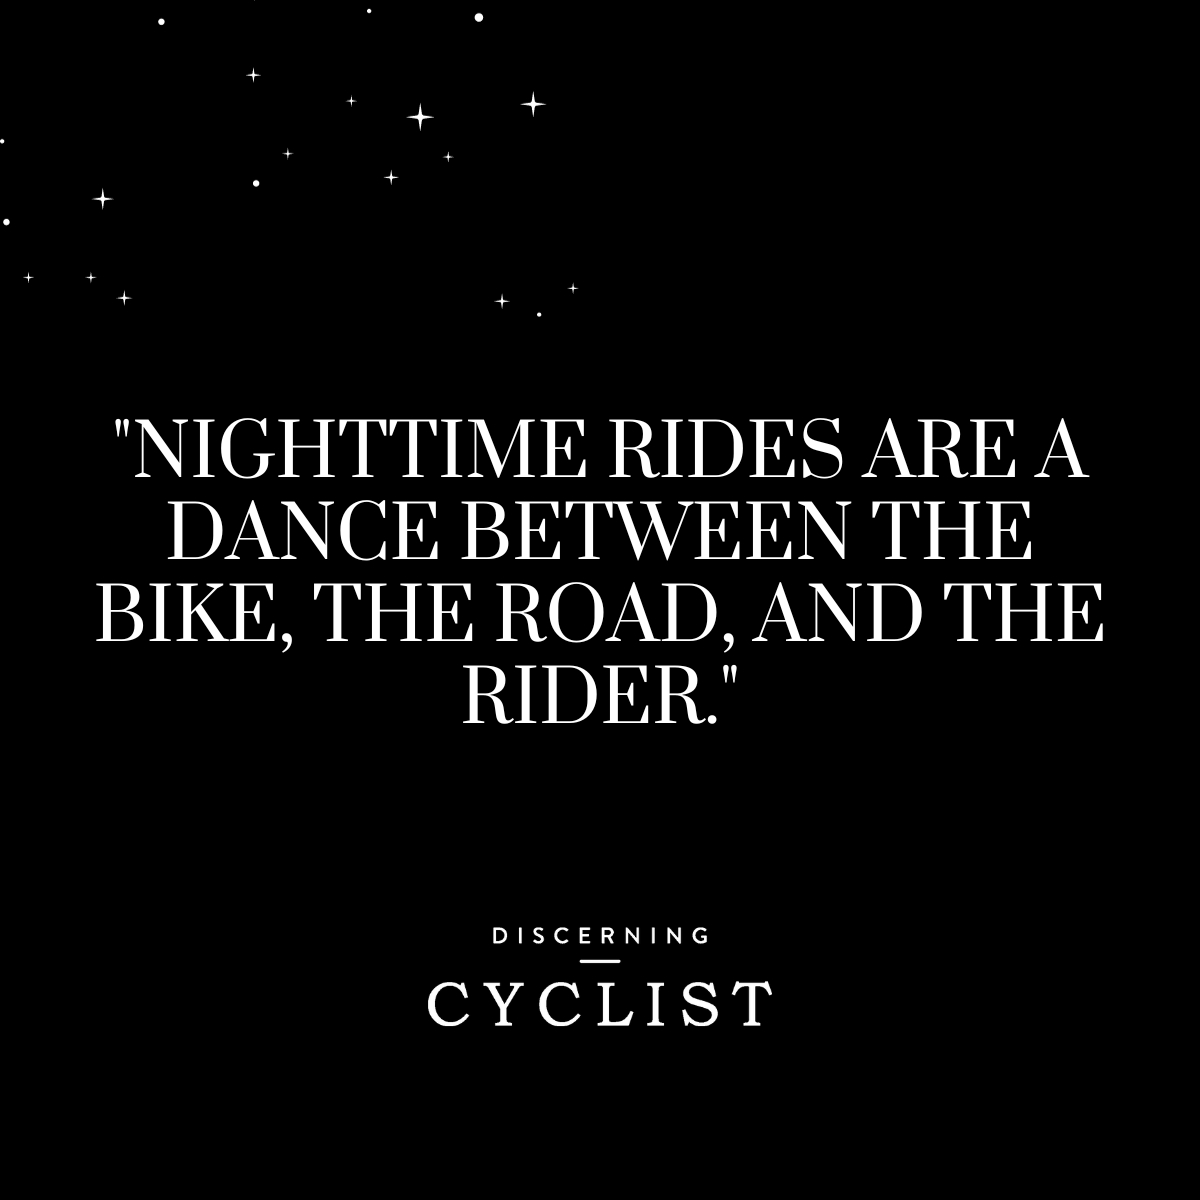 "Nighttime rides are a dance between the bike, the road, and the rider."